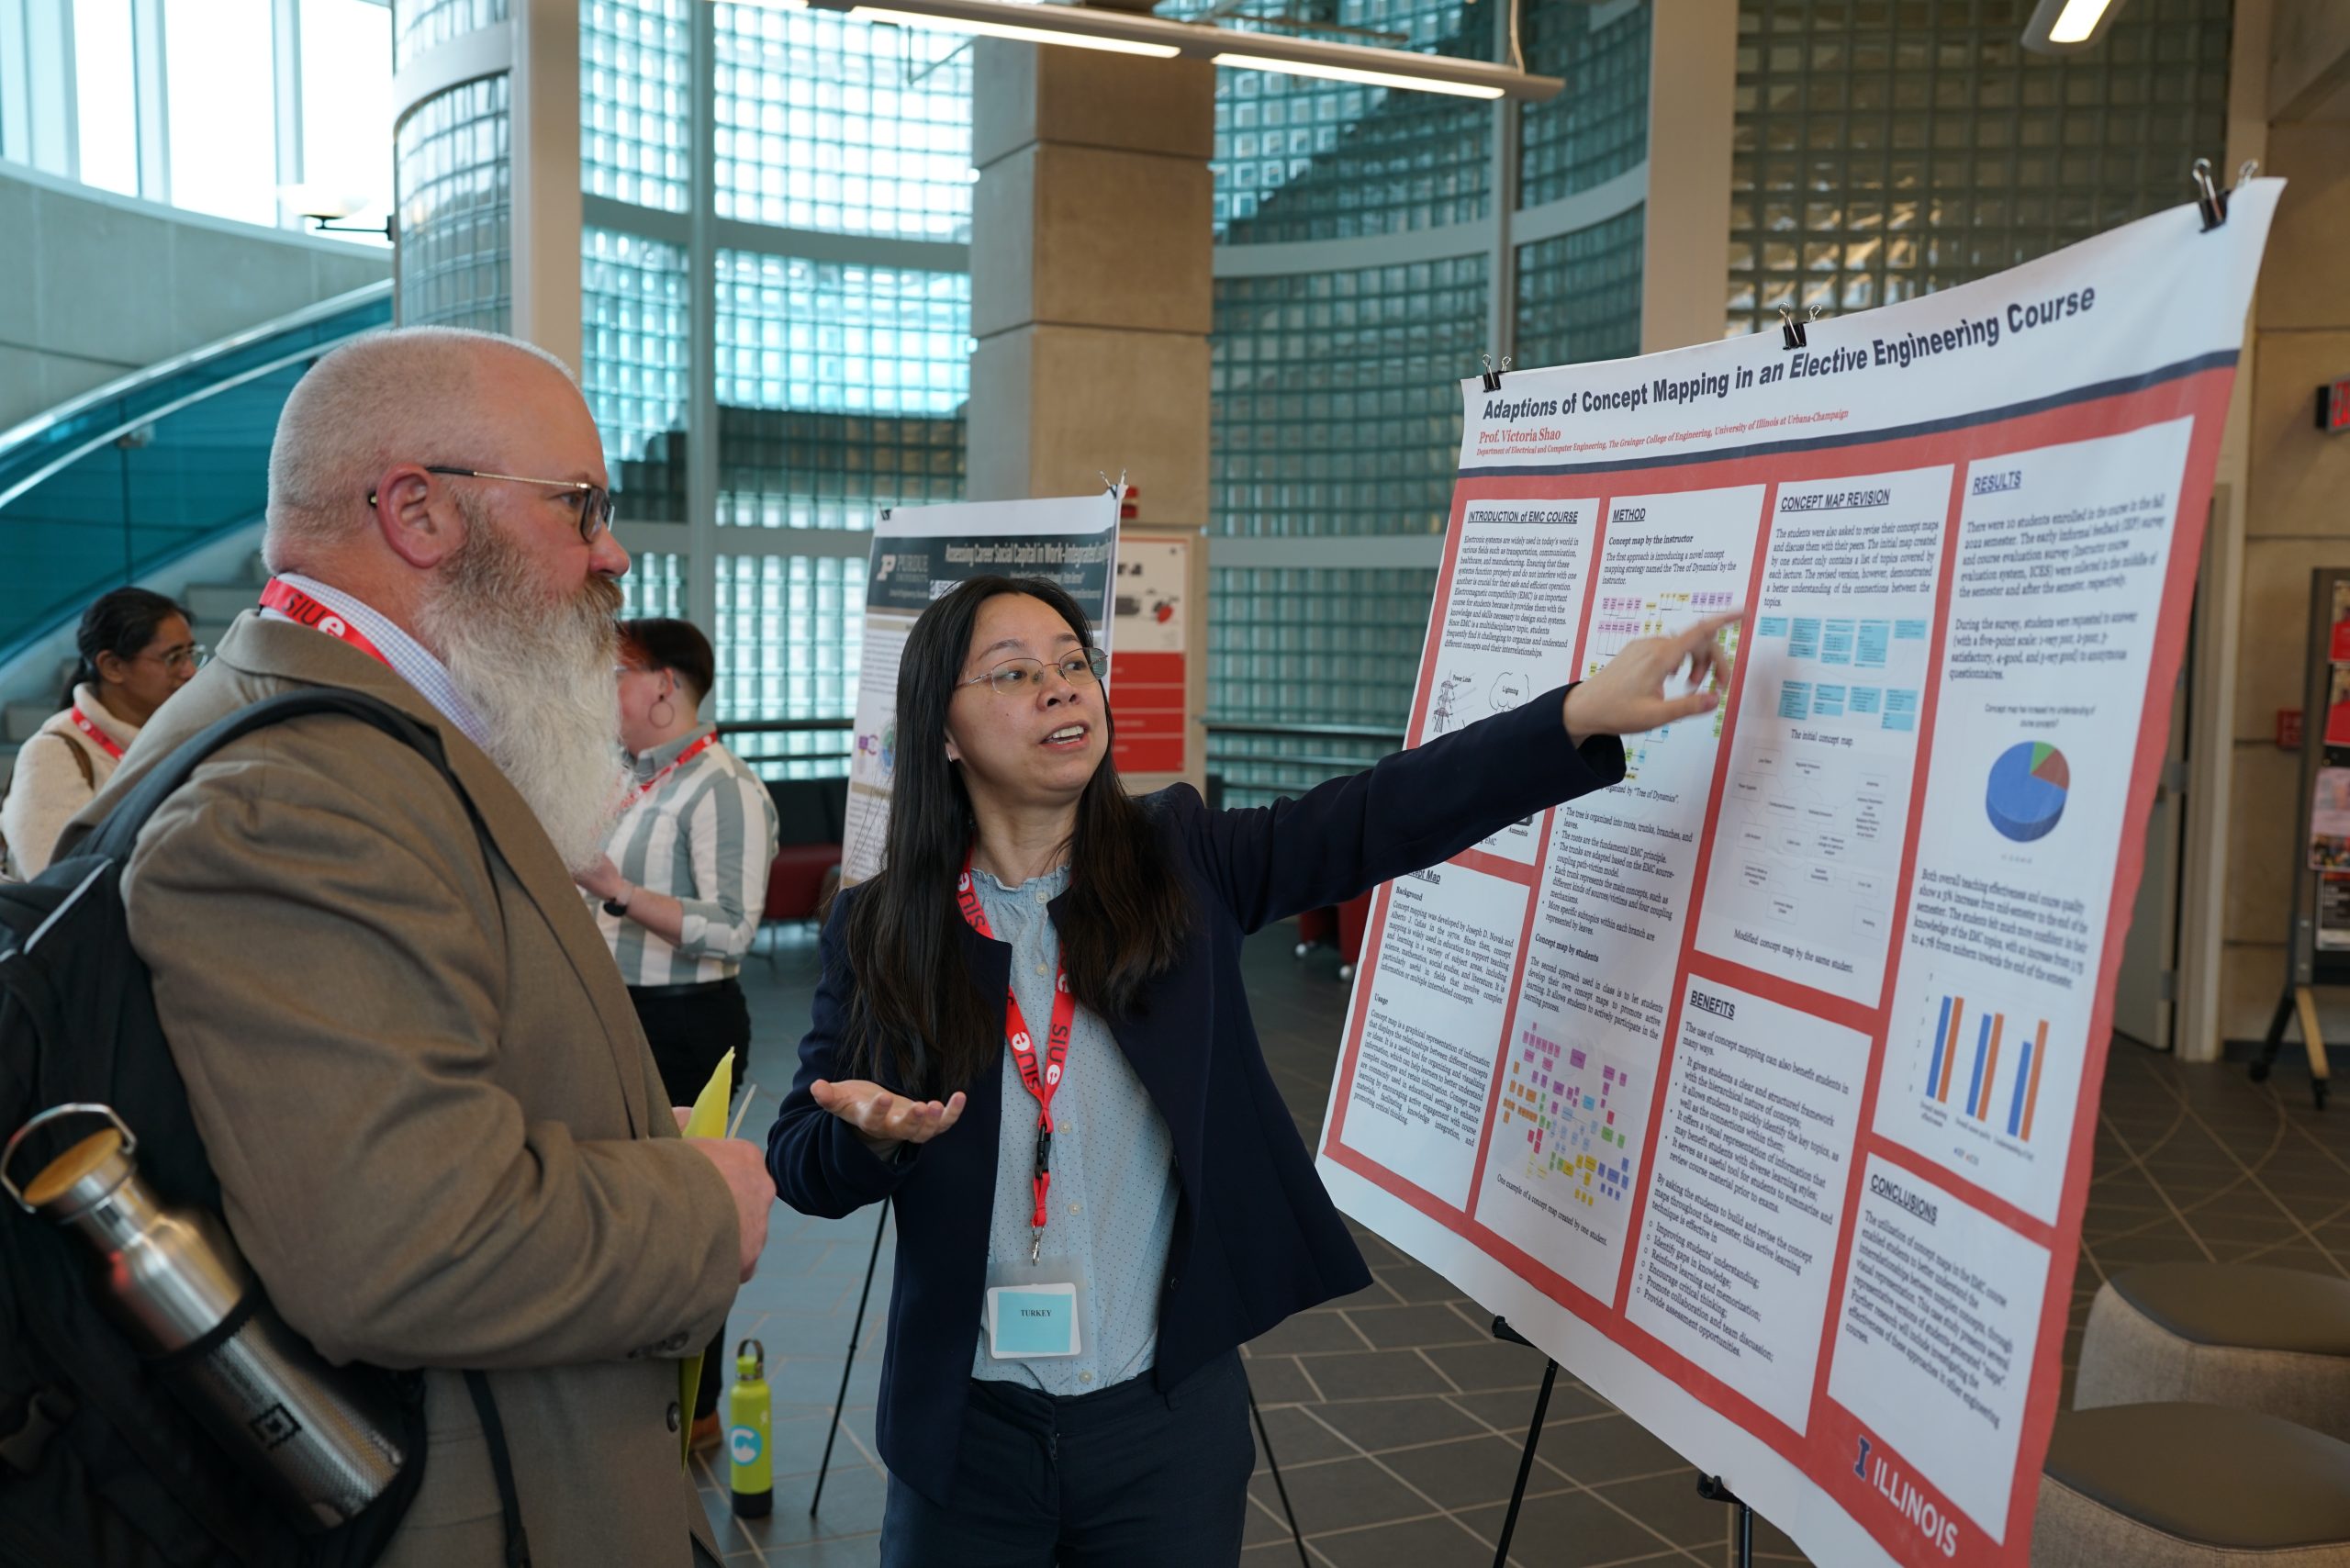 2023 Conference Poster Presentations, Adaptations of Concept Mapping in an Elective Engineering Course